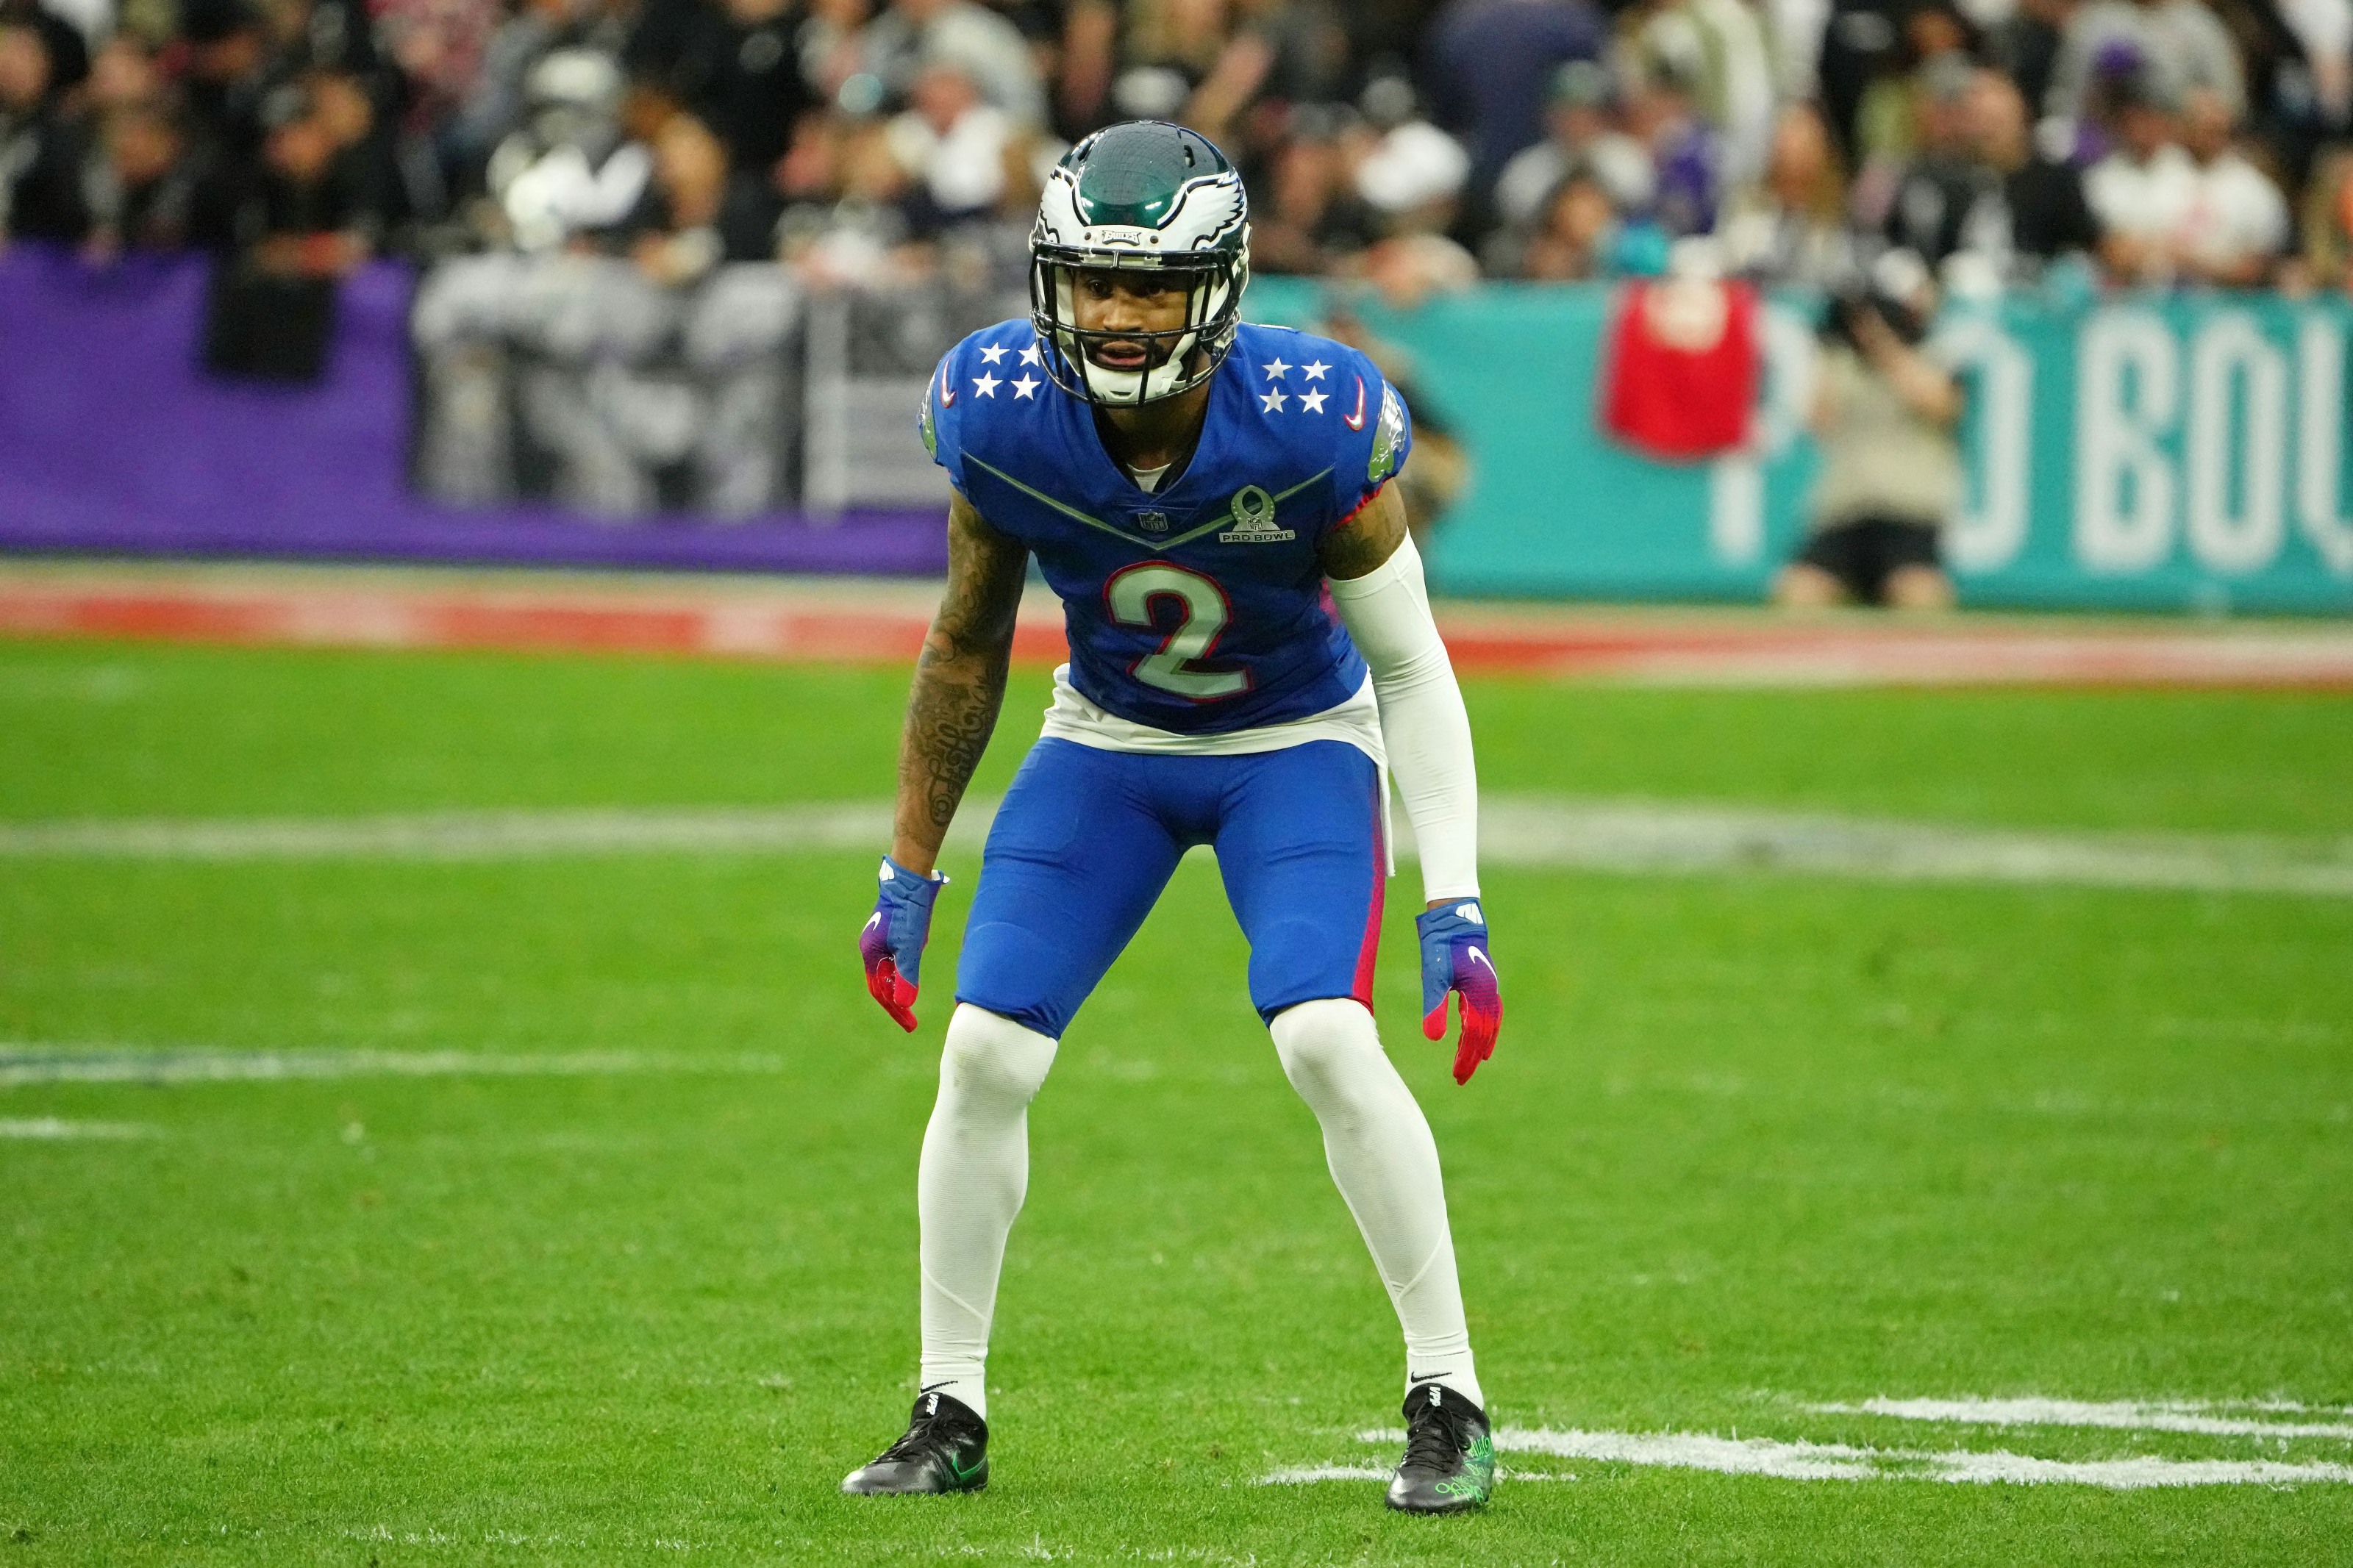 Ranking the top 10 cornerback duos in the NFL for the 2022 season